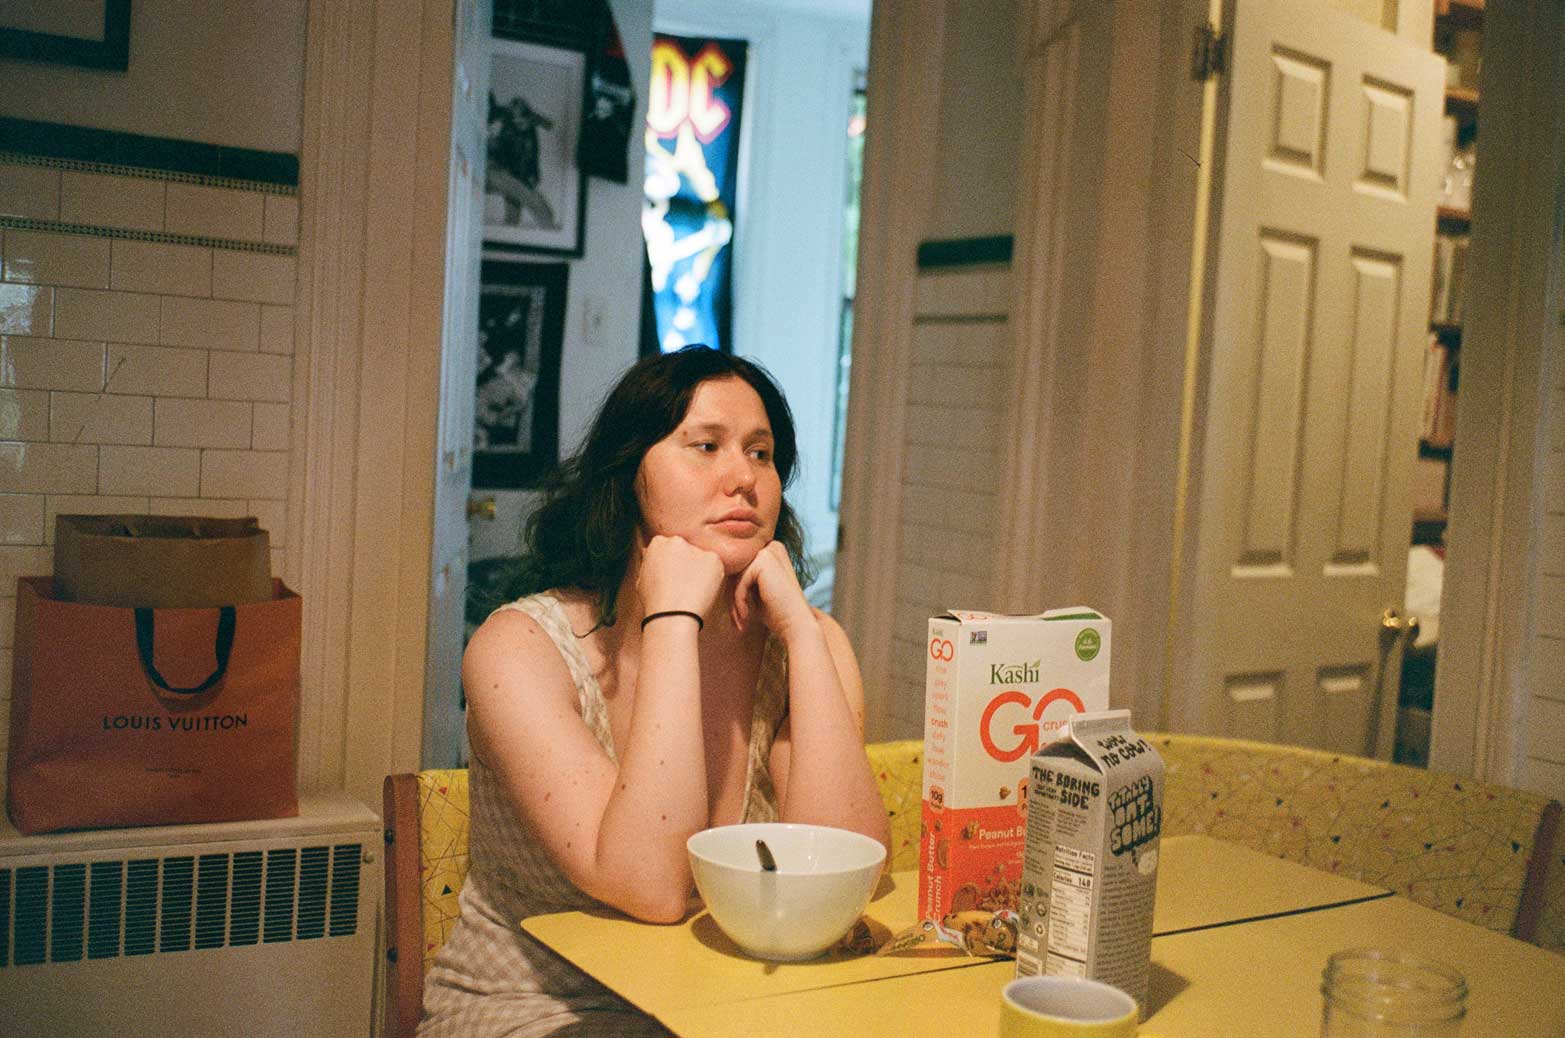 A light skinned person sits with their chin resting on their hands, looking to the right of the image, as if deep in thought. They sit at a yellow kitchen table with a bowl of cereal. In the background we can see an AC/DC poster in the window of another room.